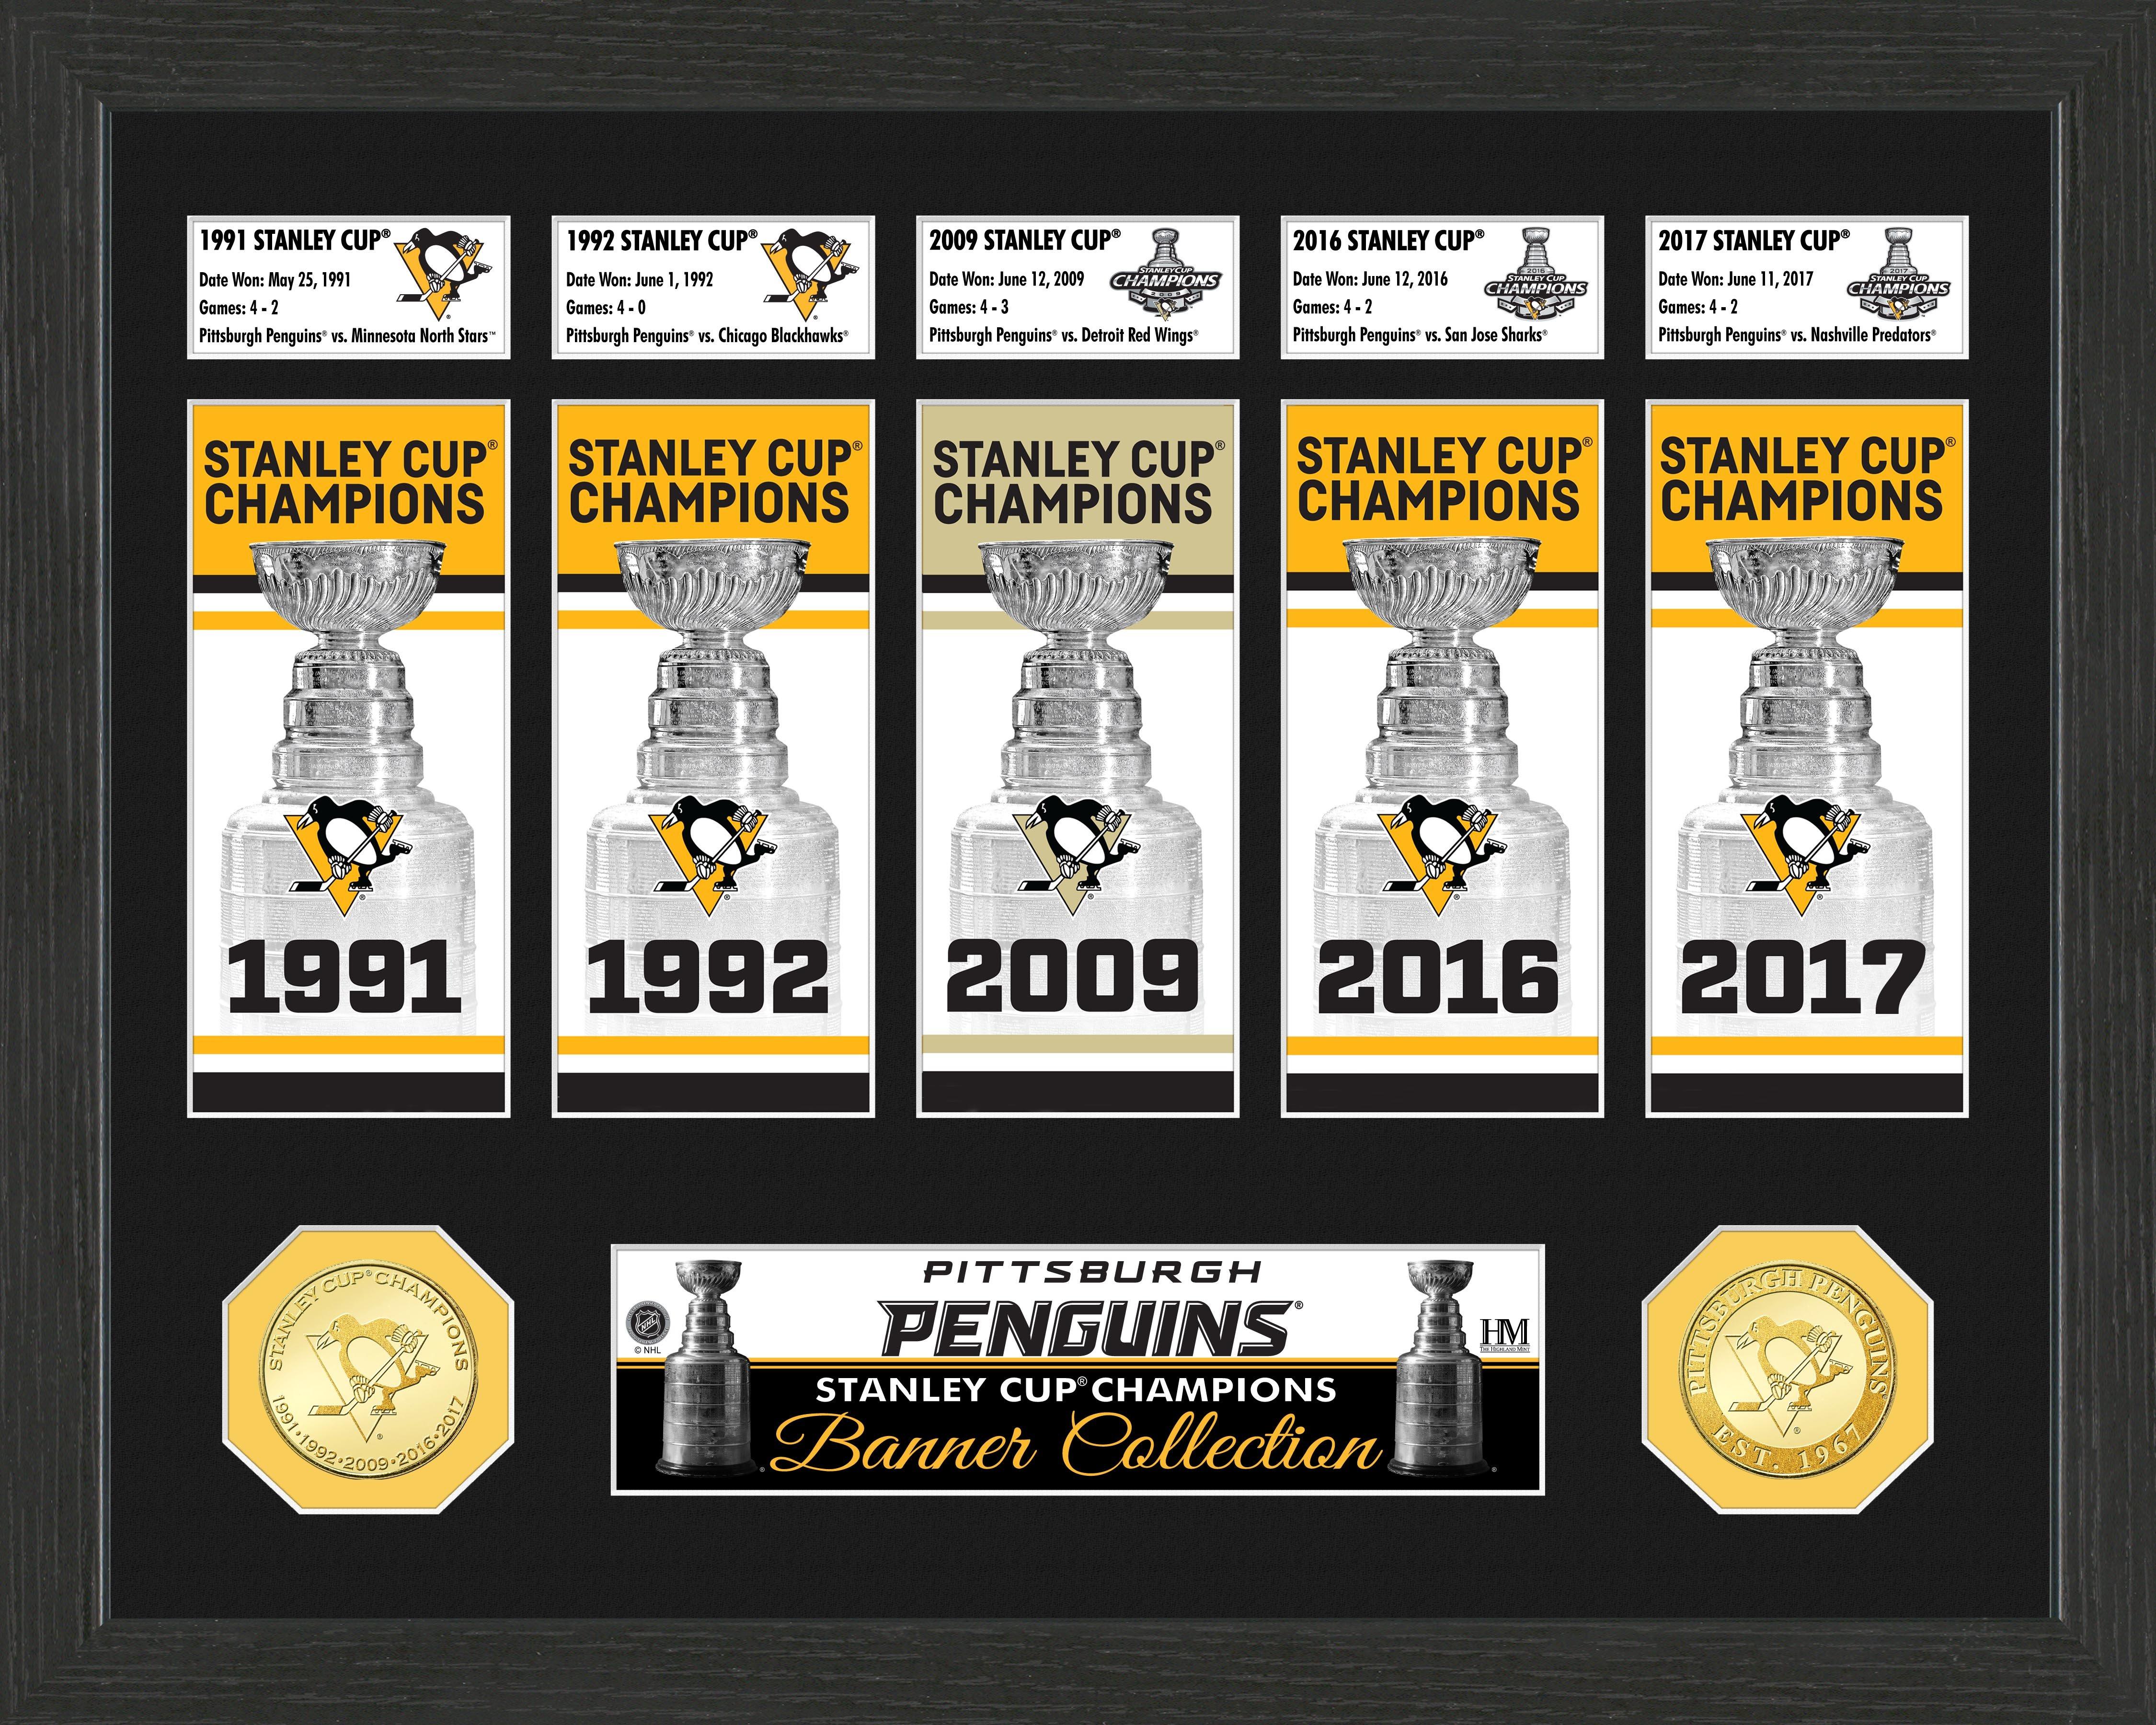 Pittsburgh Penguins: 2016 Stanley Cup Champions